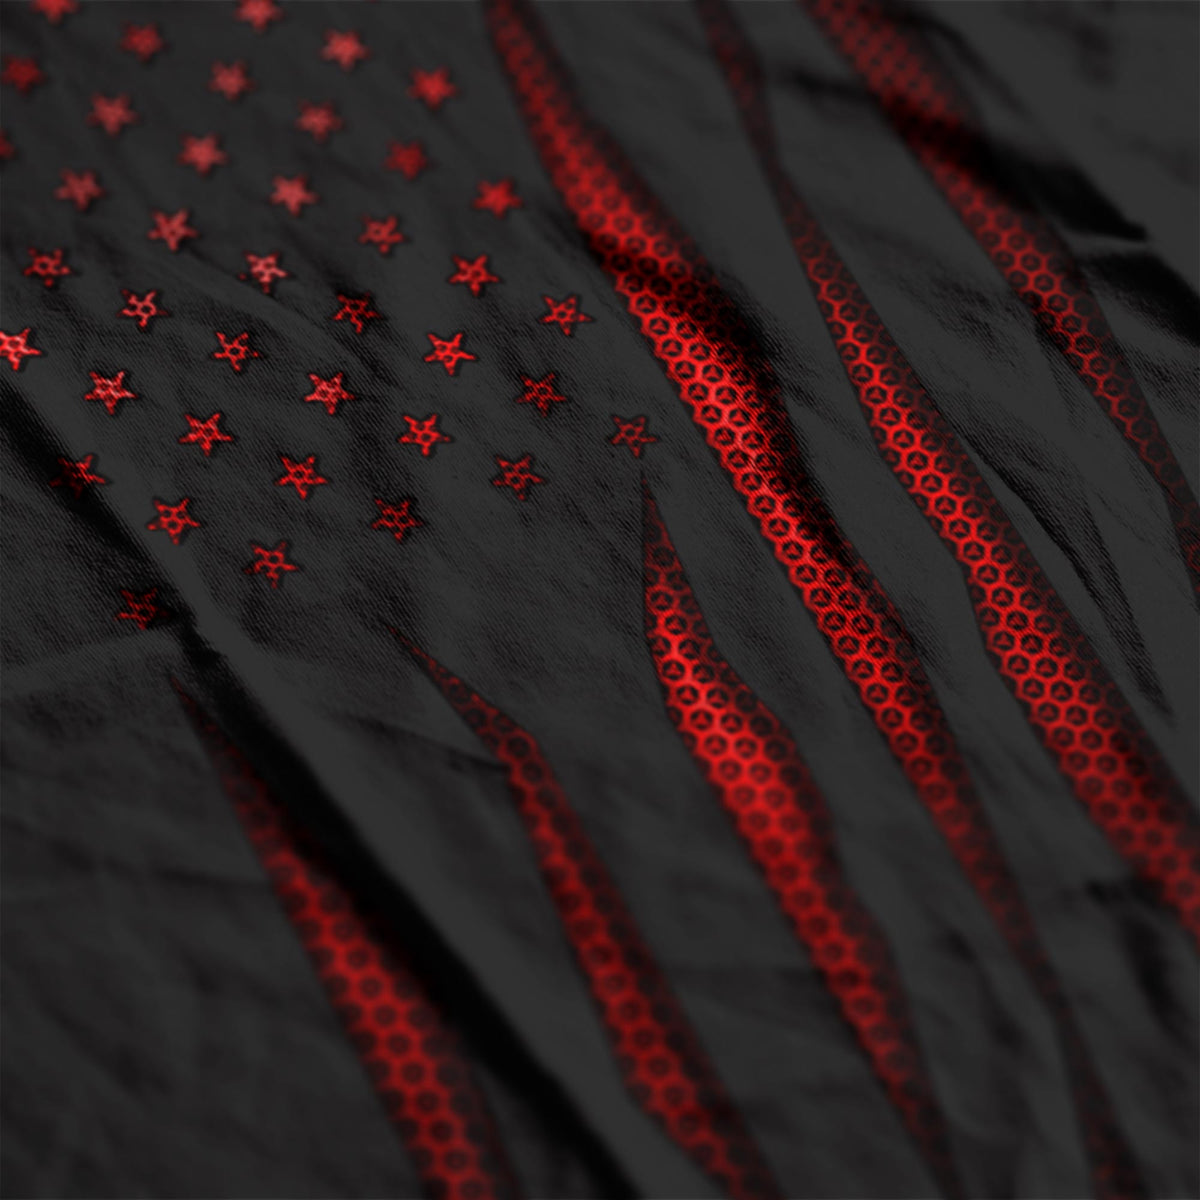 Red Carbon Onyx American Flag